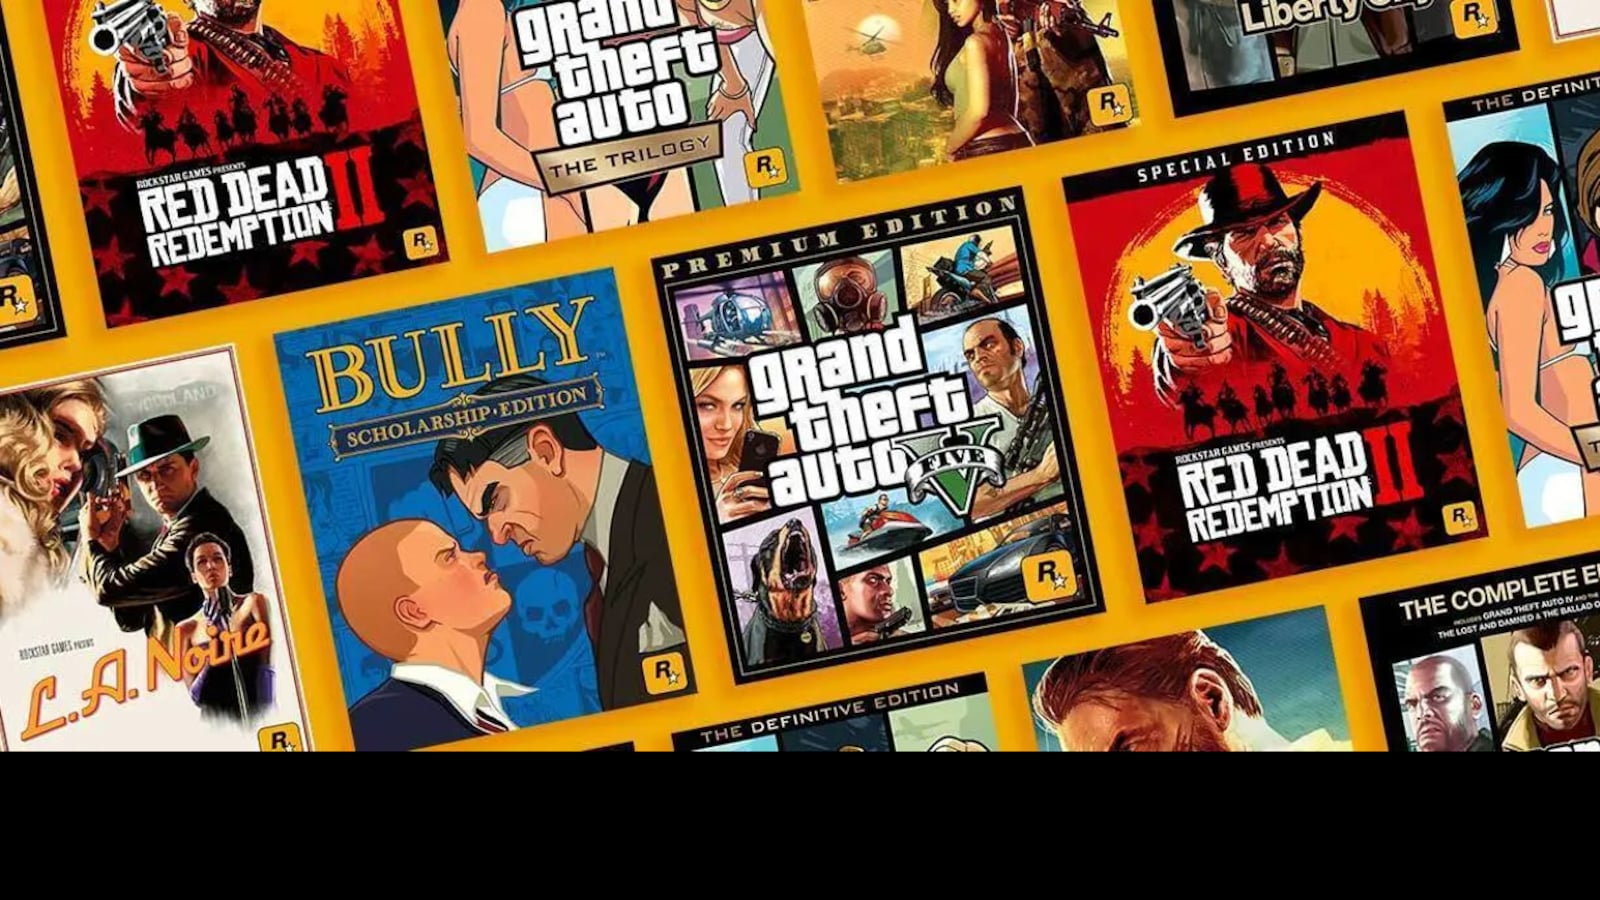 Rockstar Games' holiday sale can net you up to 70% off on its titles